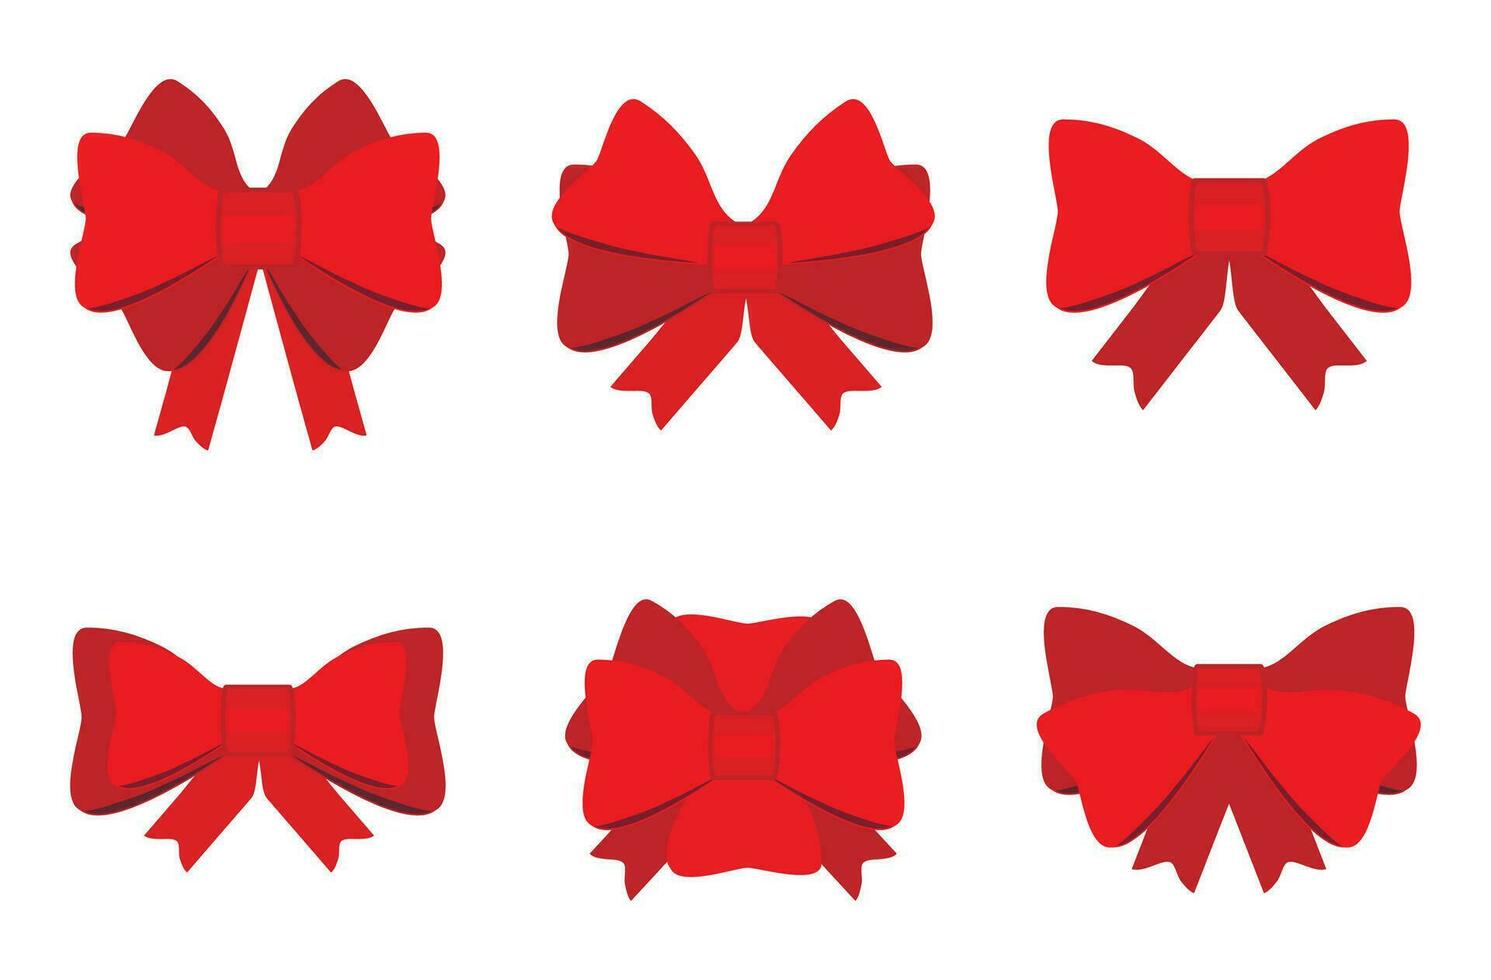 Set of red gift bows with ribbons for decorating gifts, surprises for holidays. Packing presents icon vector